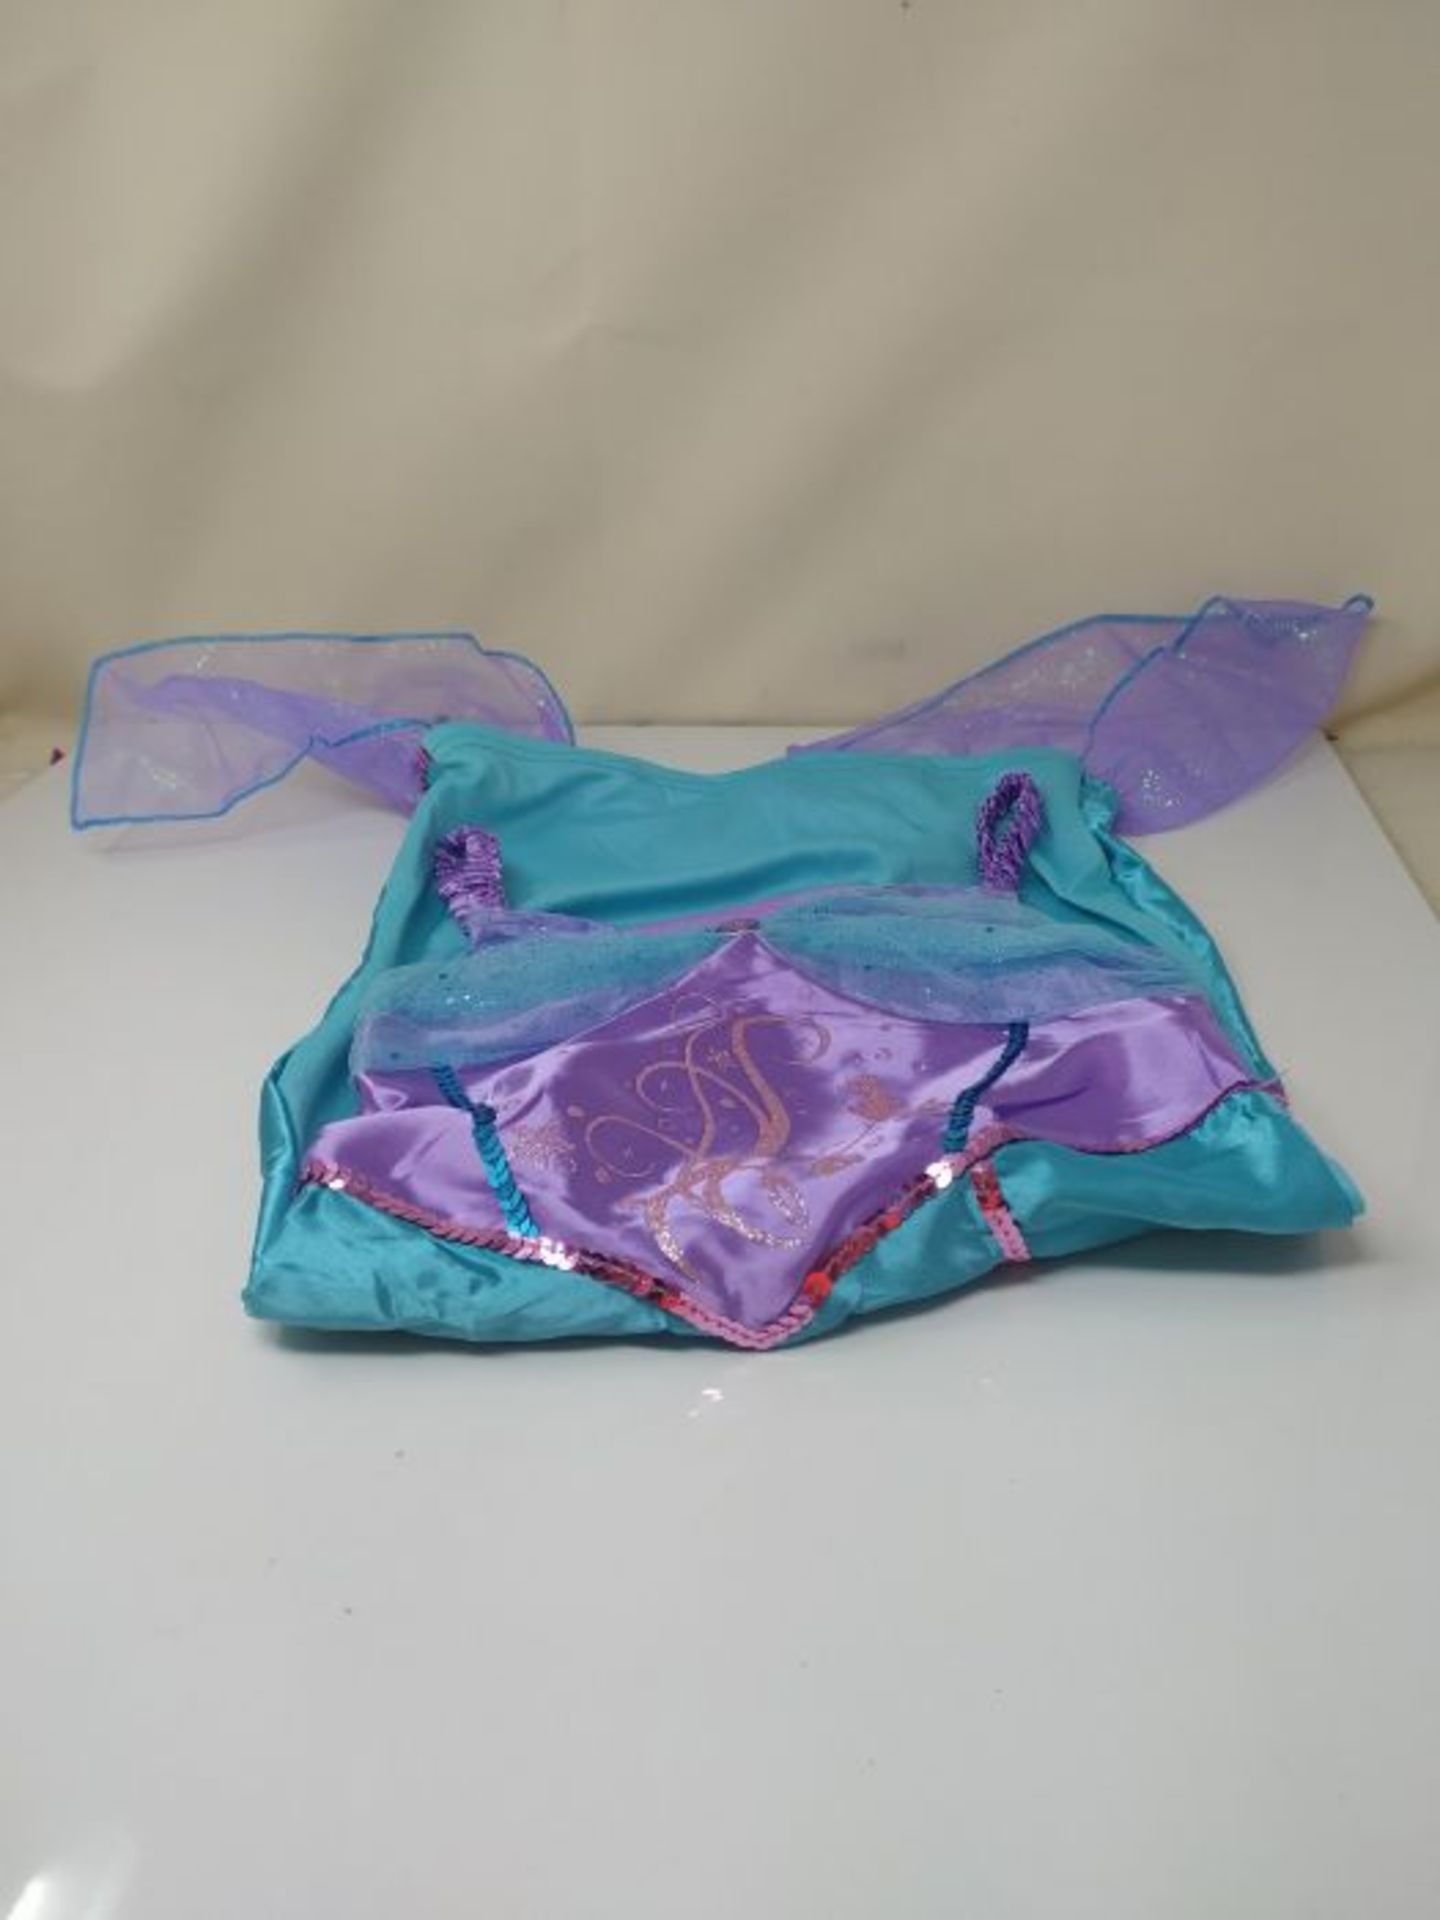 Rubie's 620502S Official Mermaid Costume, Girls', Blue, Small (Age 3-4 Years) - Image 2 of 2